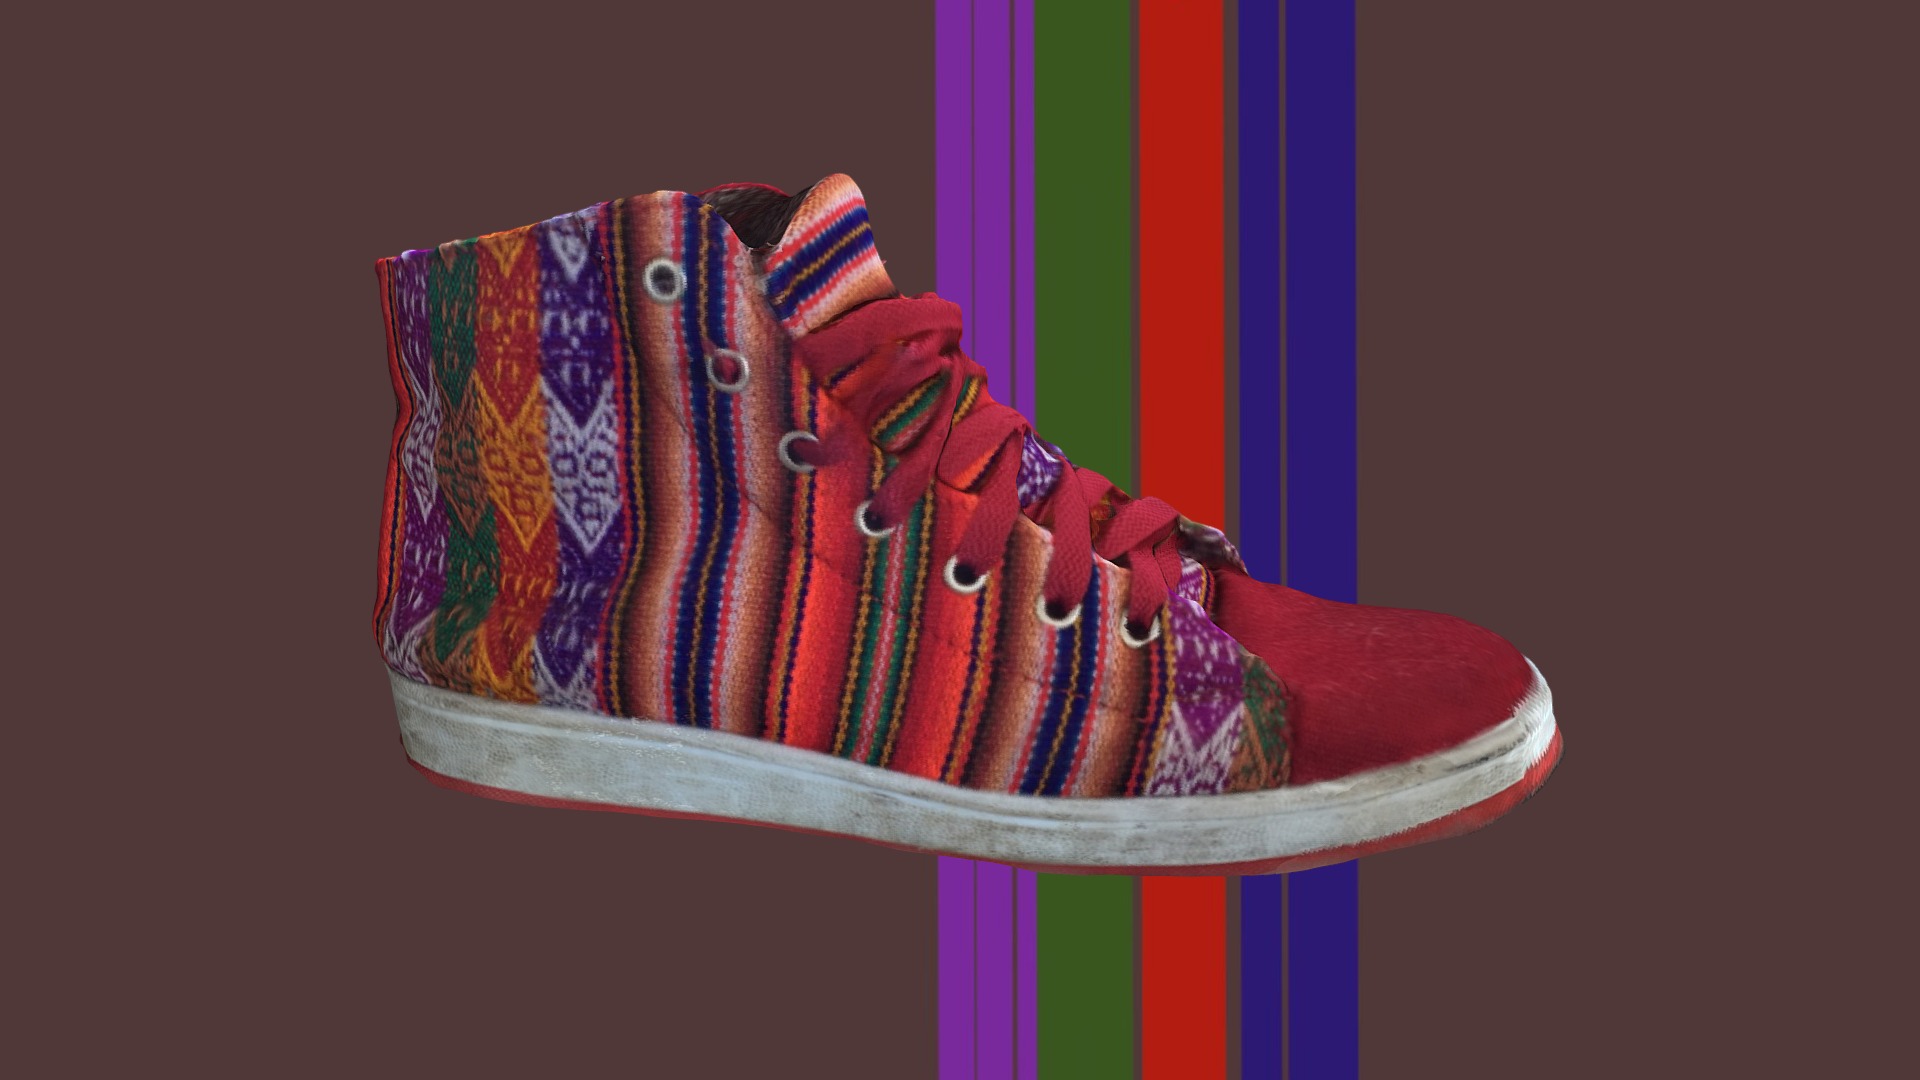 3D model Bolivian shoe - This is a 3D model of the Bolivian shoe. The 3D model is about a red and blue shoe.